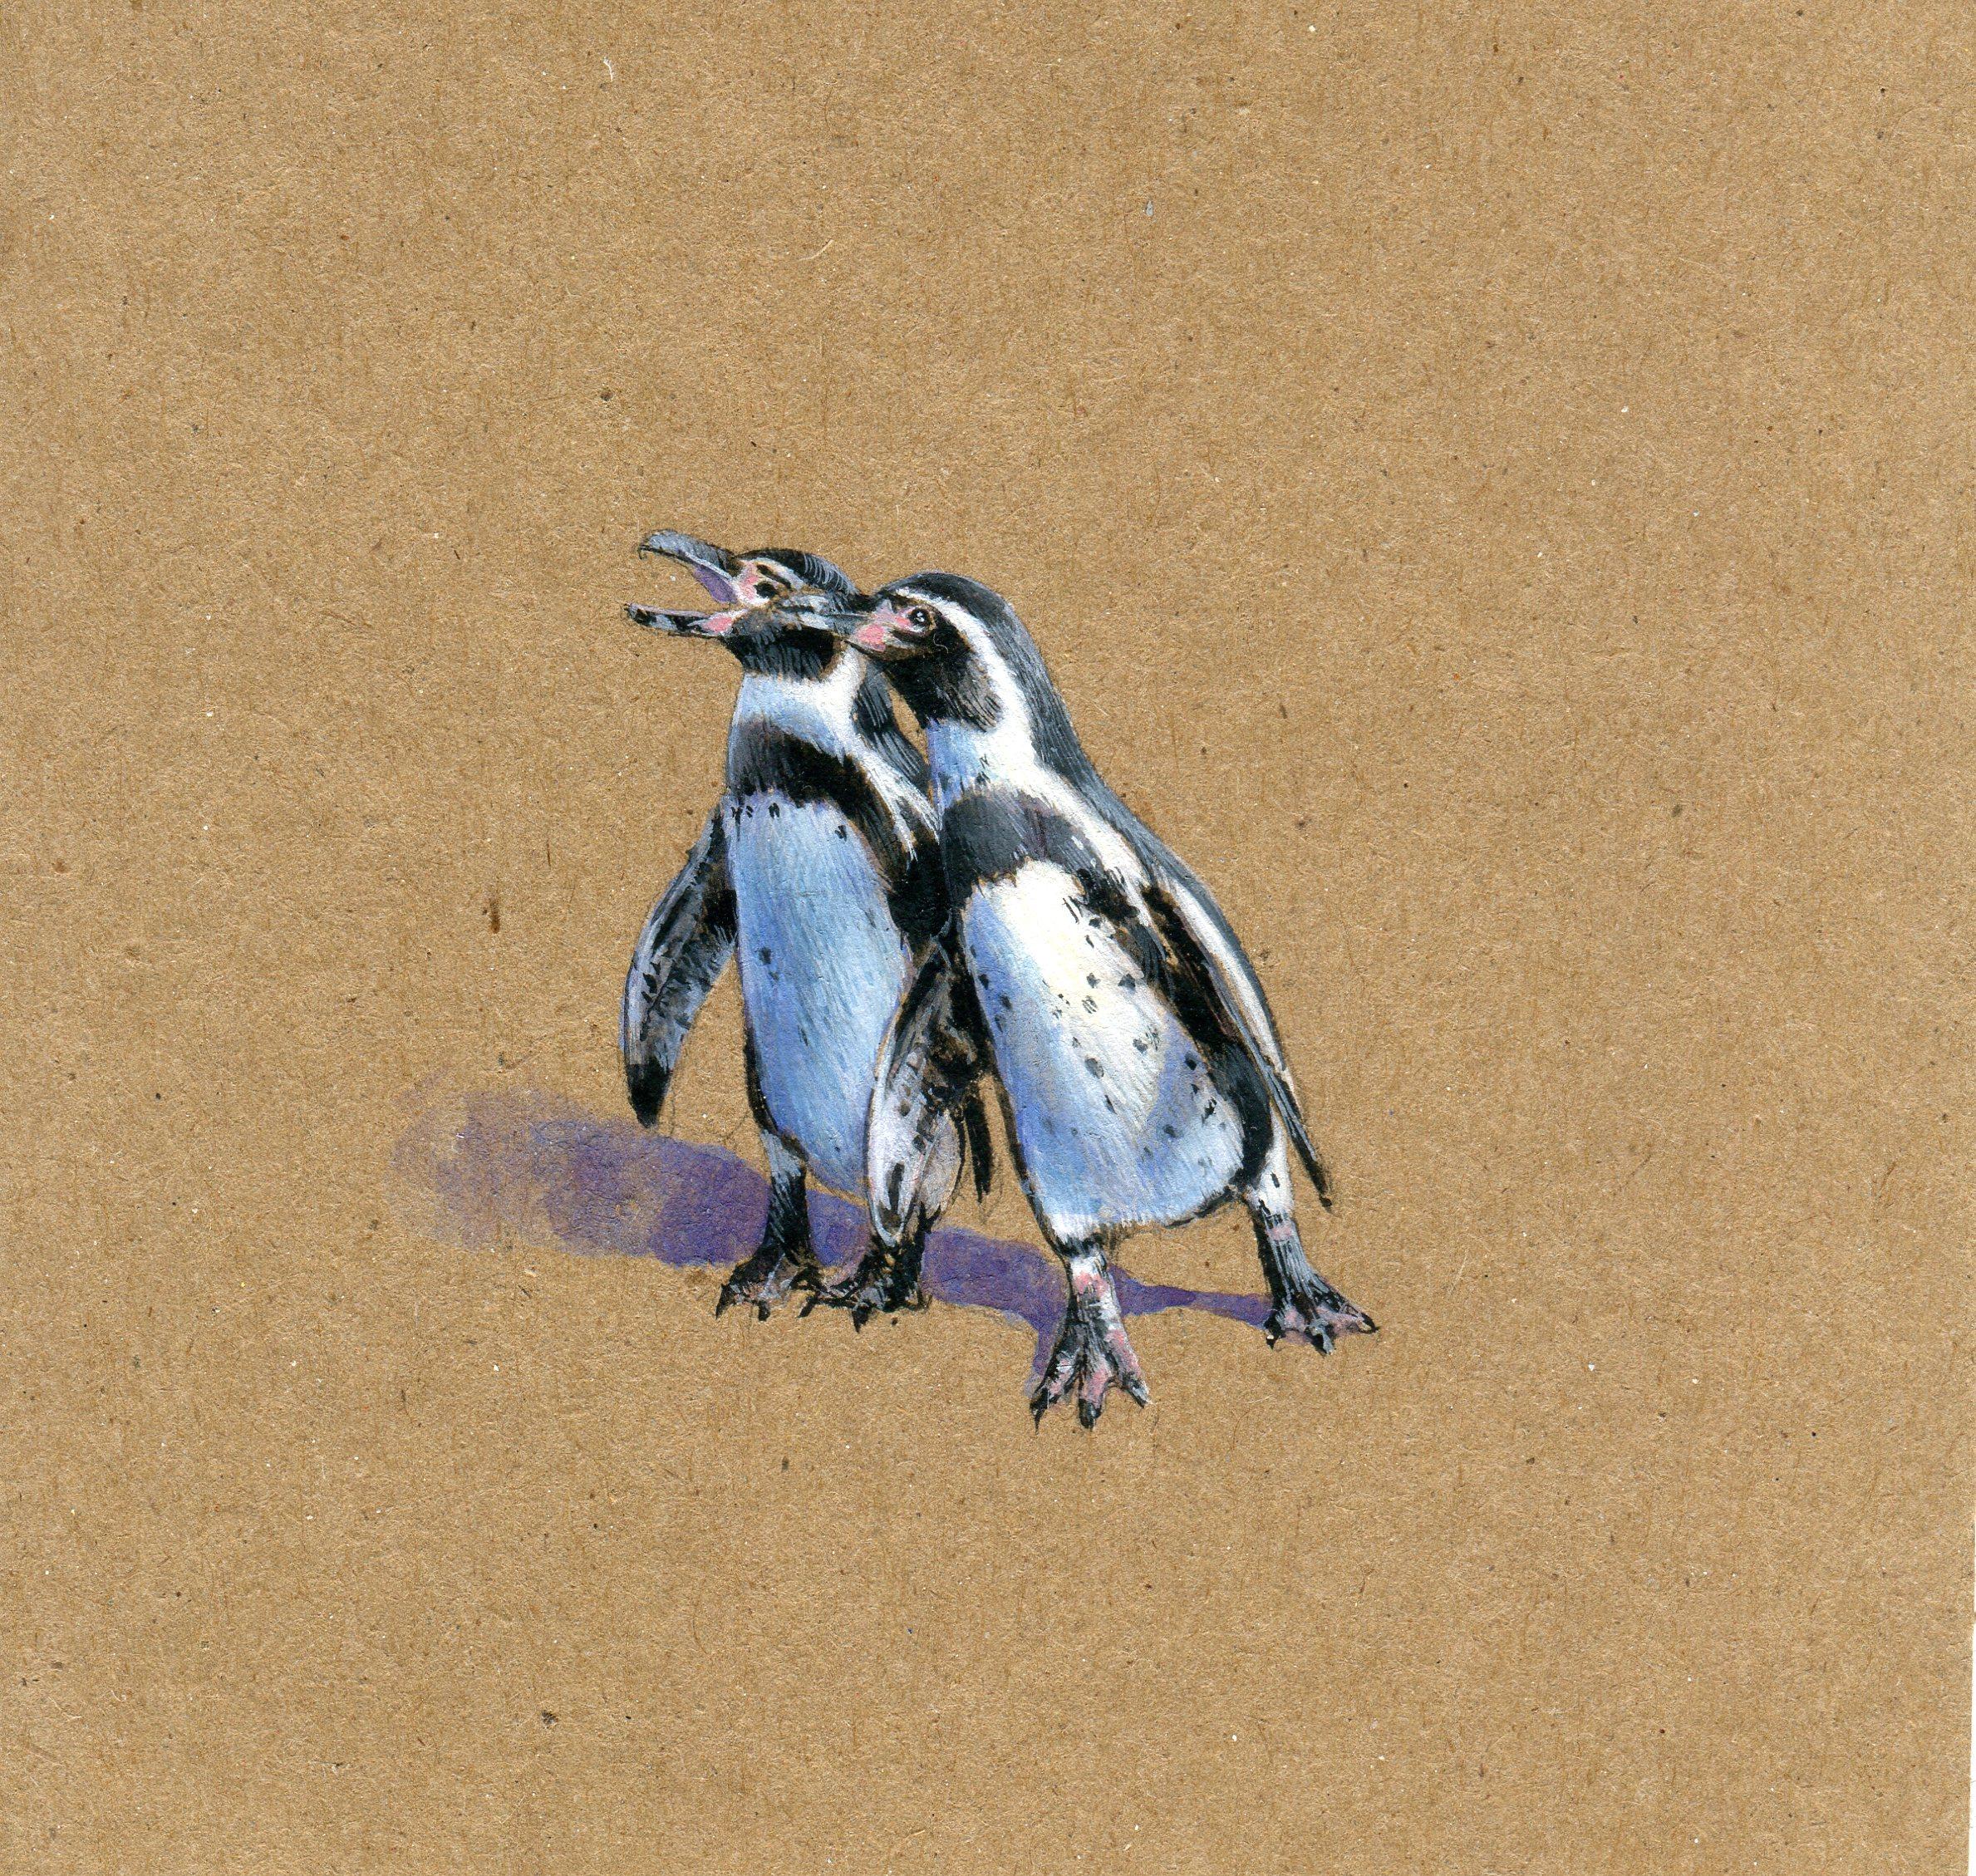 Dina Brodsky Animal Art - Squabbling Penguins, contemporary realist animal watercolor on paper